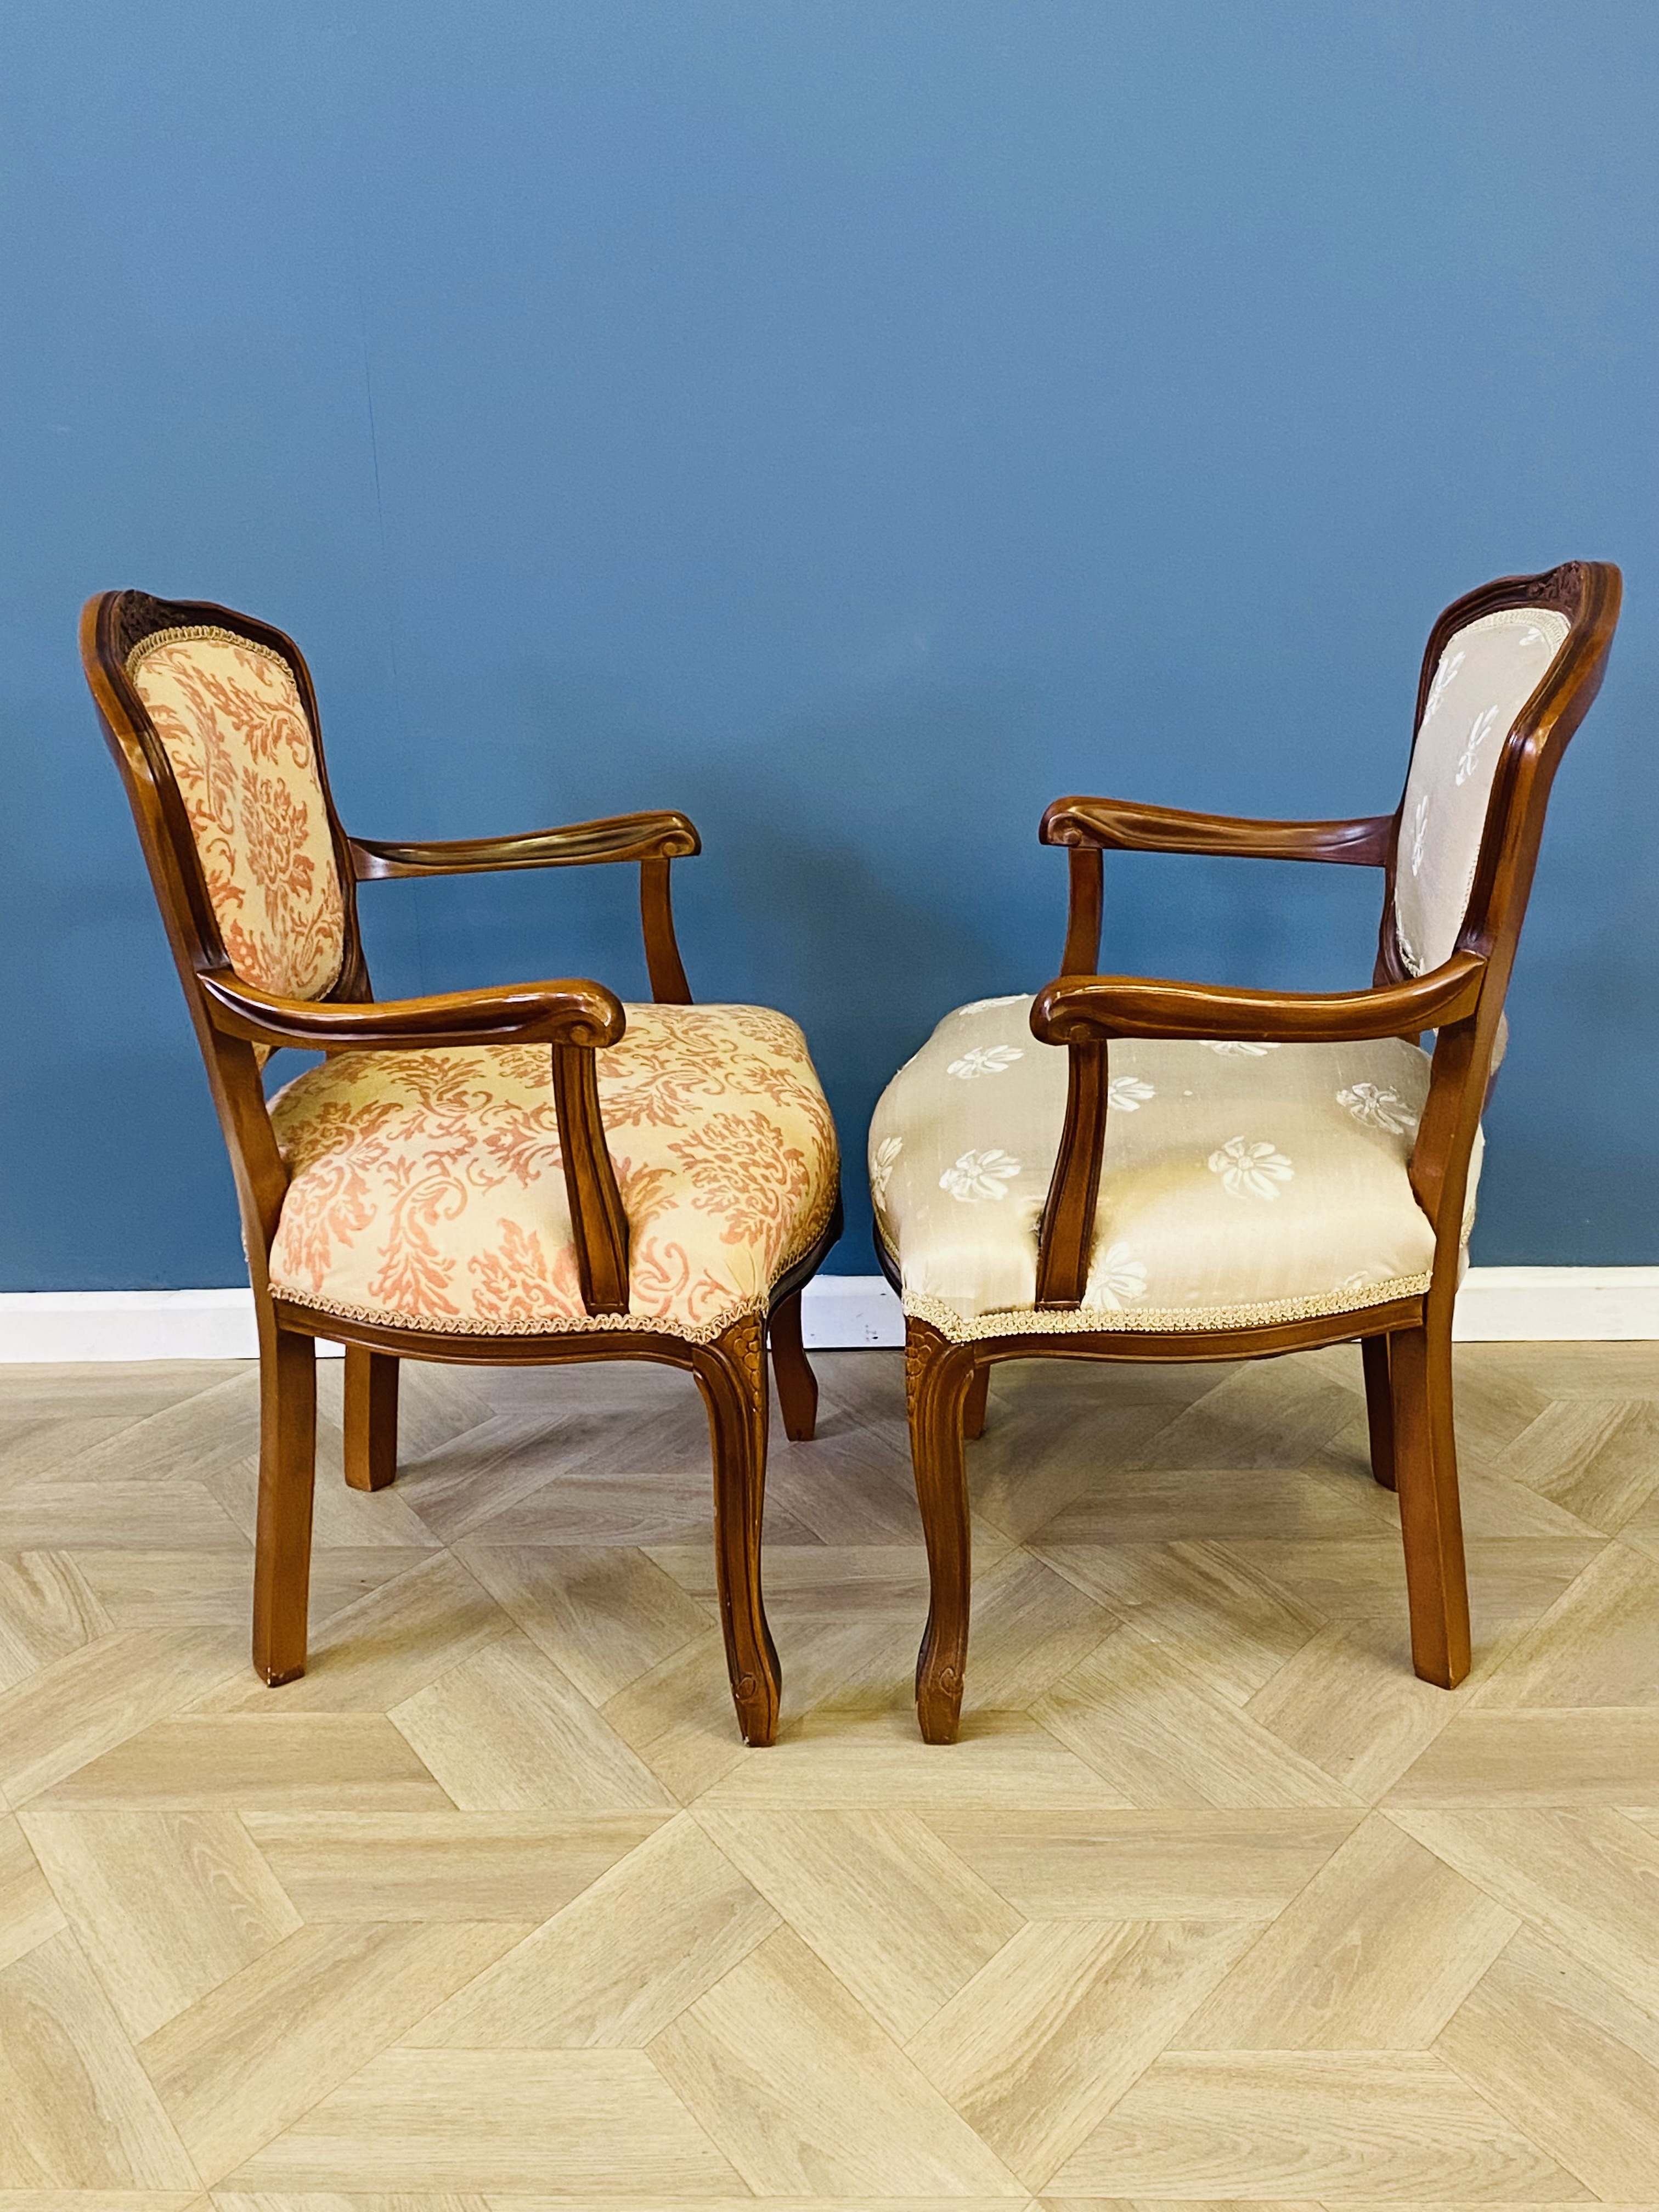 Pair of reproduction French style upholstered elbow chairs - Image 7 of 7